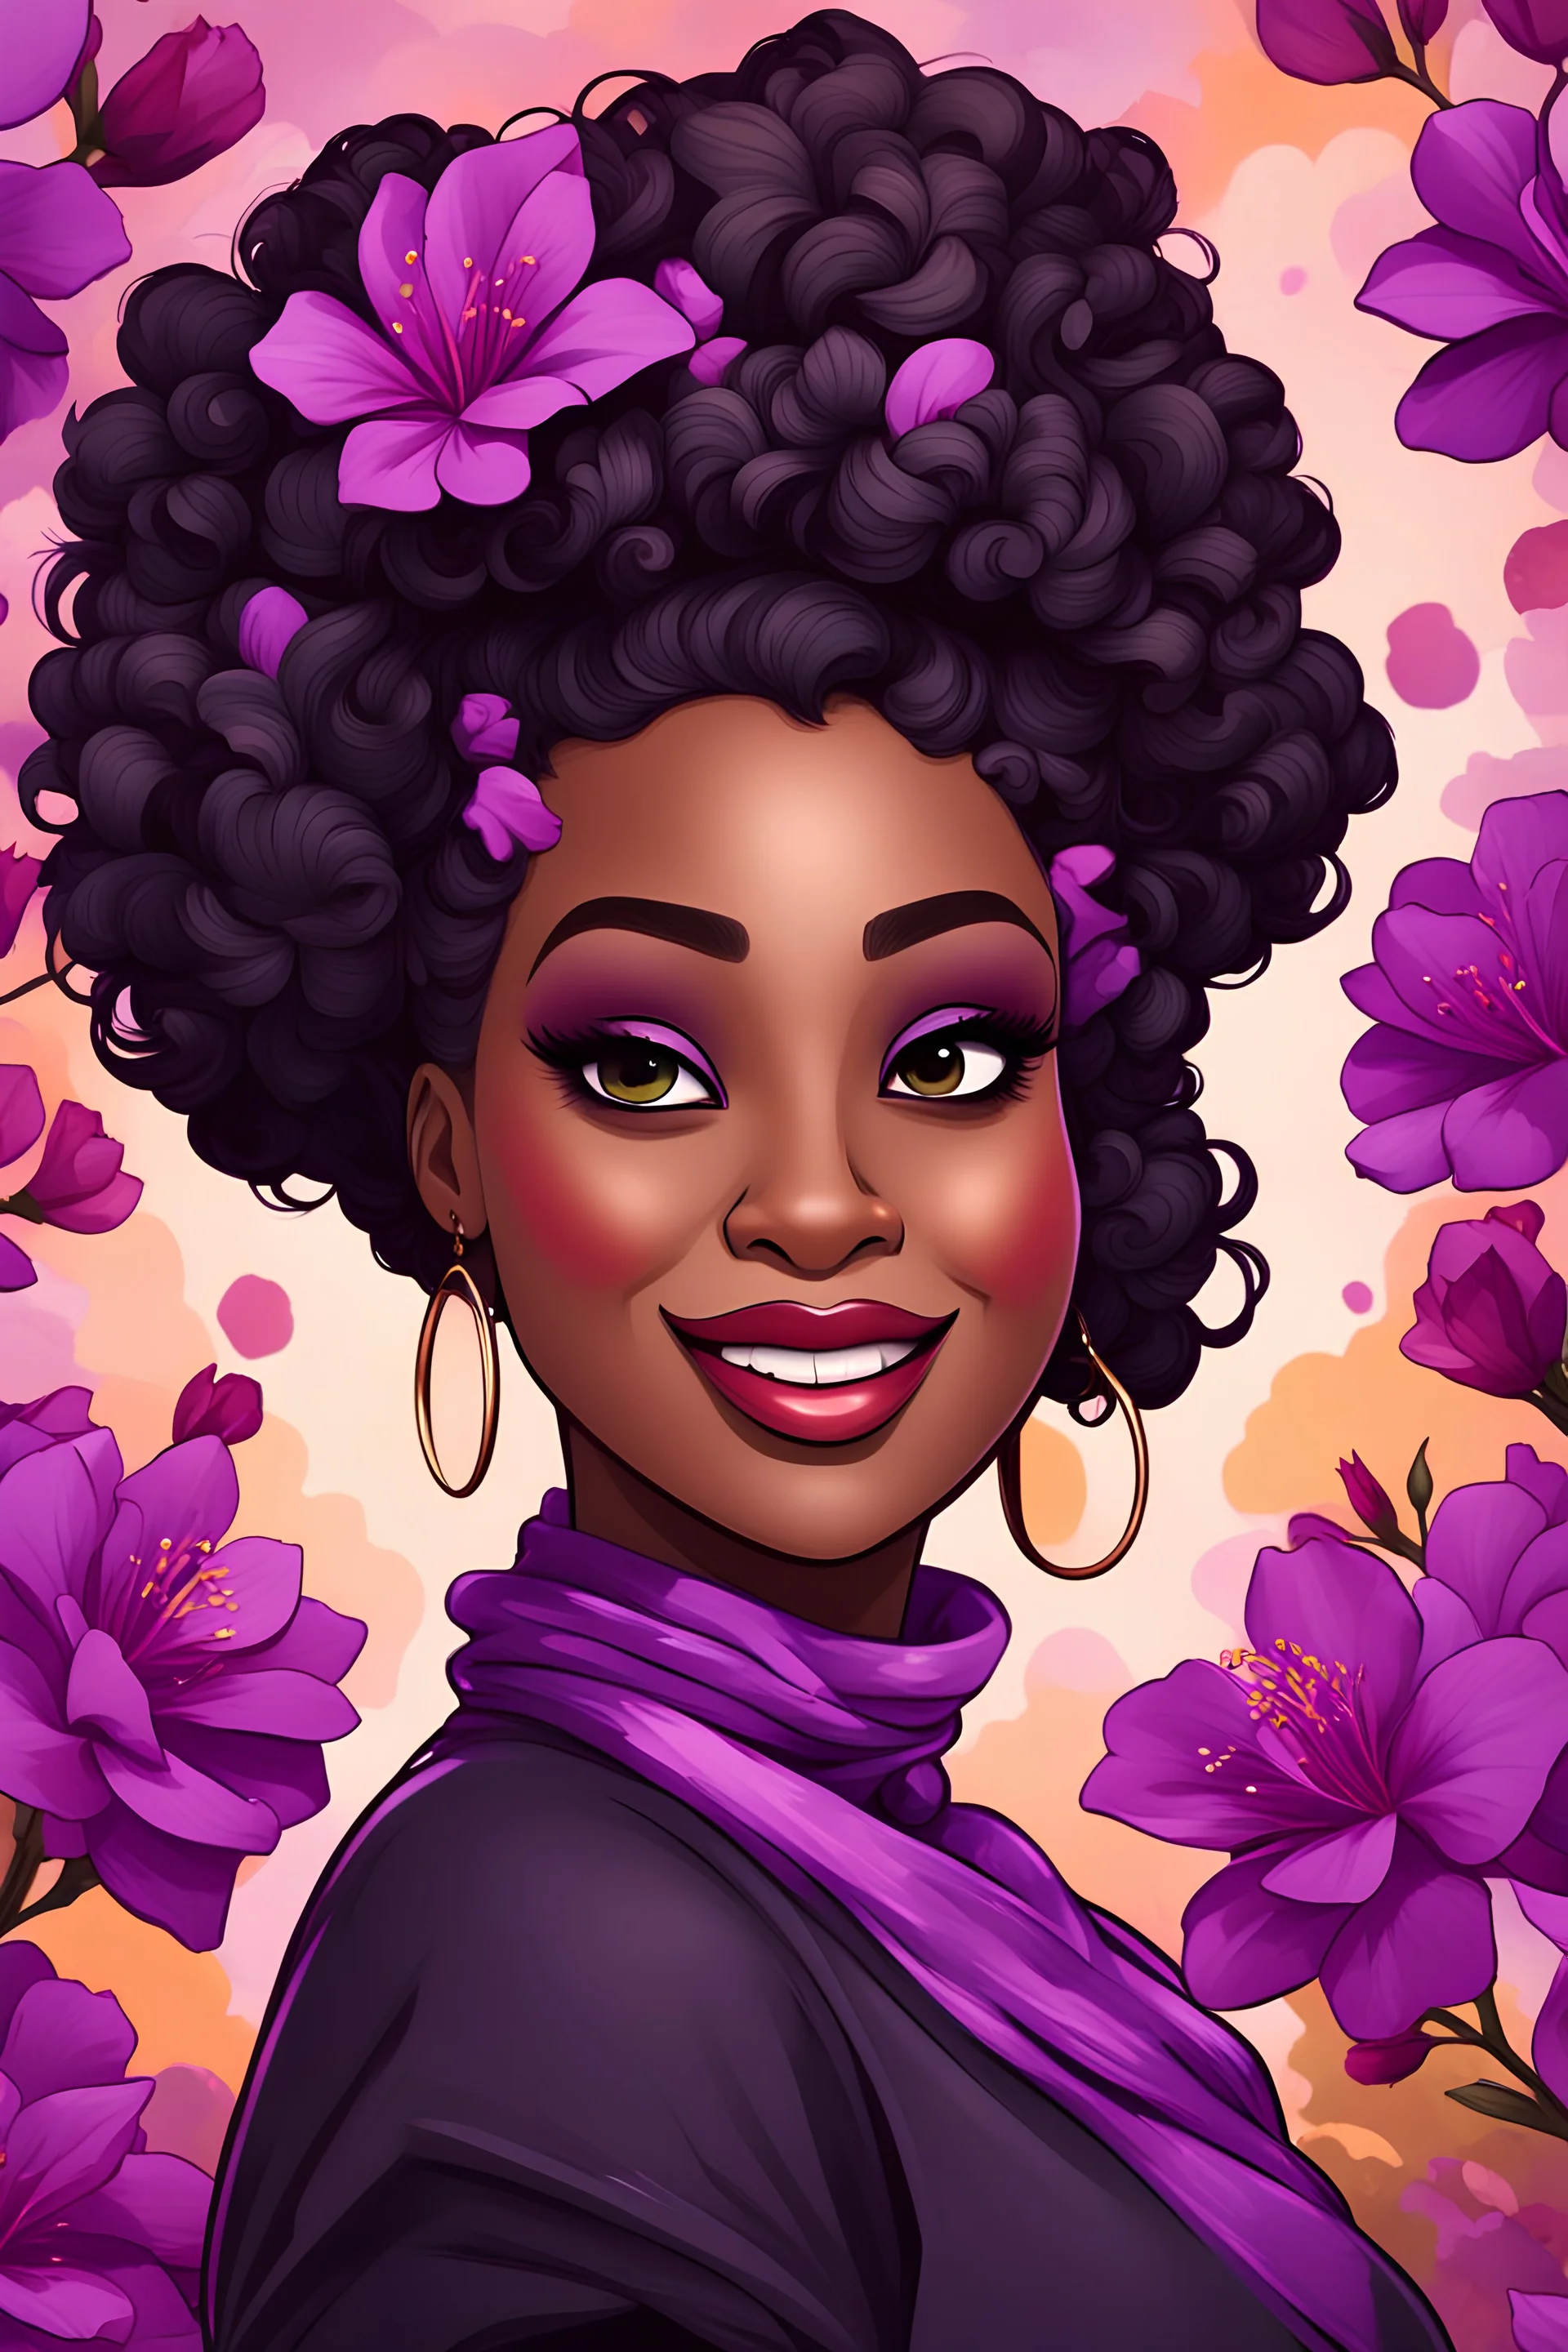 Create a abstract cartoon art style image of a plus size black female looking down with a smile on her face. Prominent makeup with hazel eyes. Highly detailed messy curly bun with a hair scarf tied on her head with large purple azalea flowers surrounding her. 2k